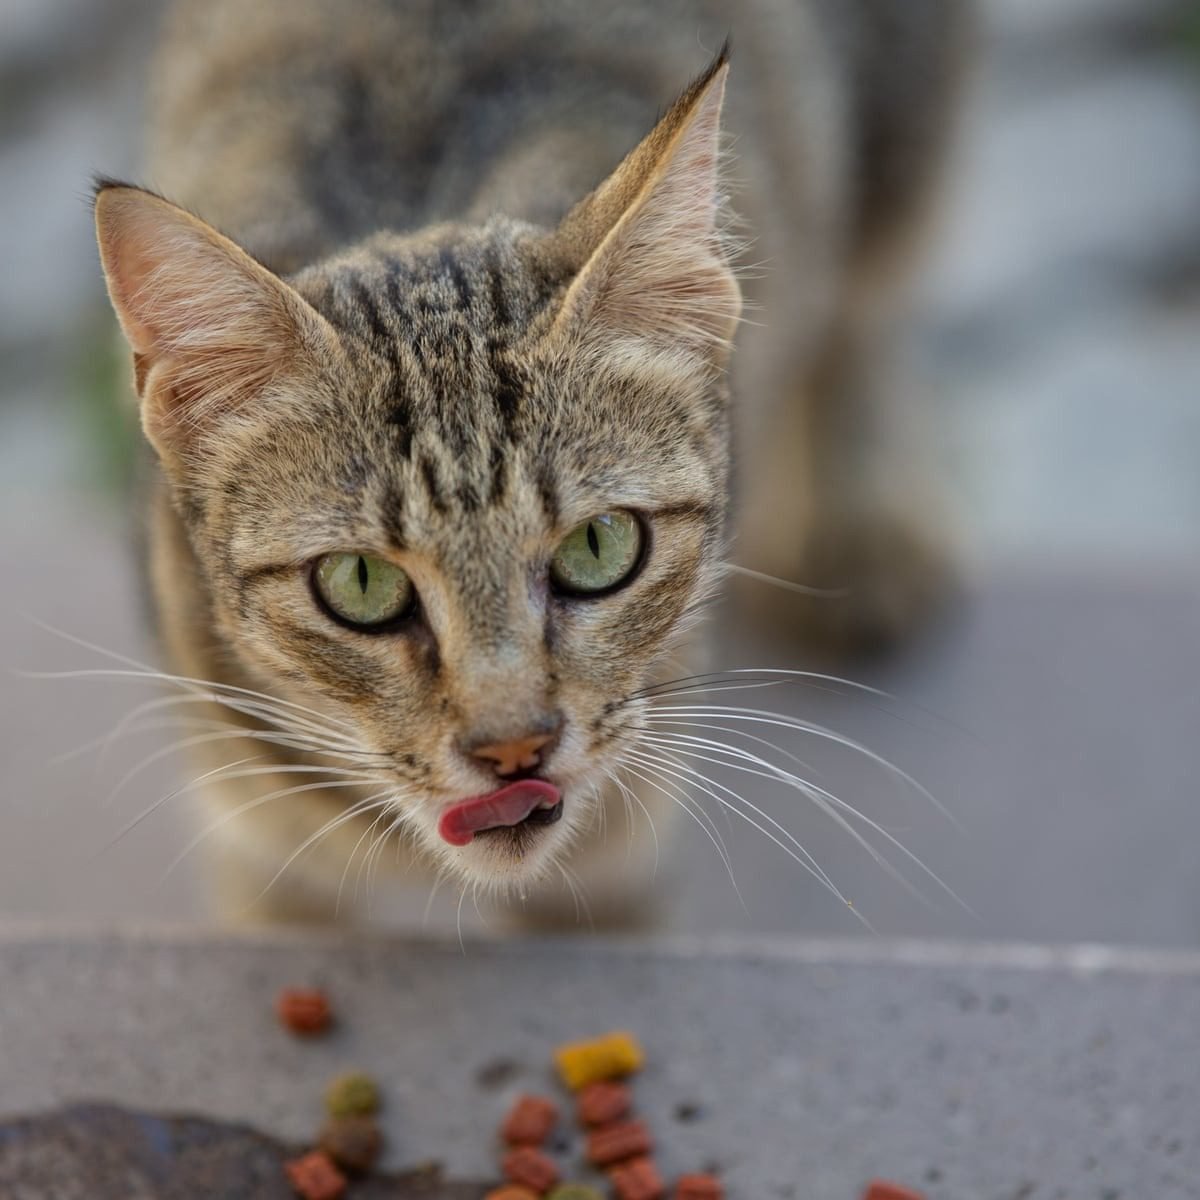 Dealing with Challenges of Feeding Stray Cats